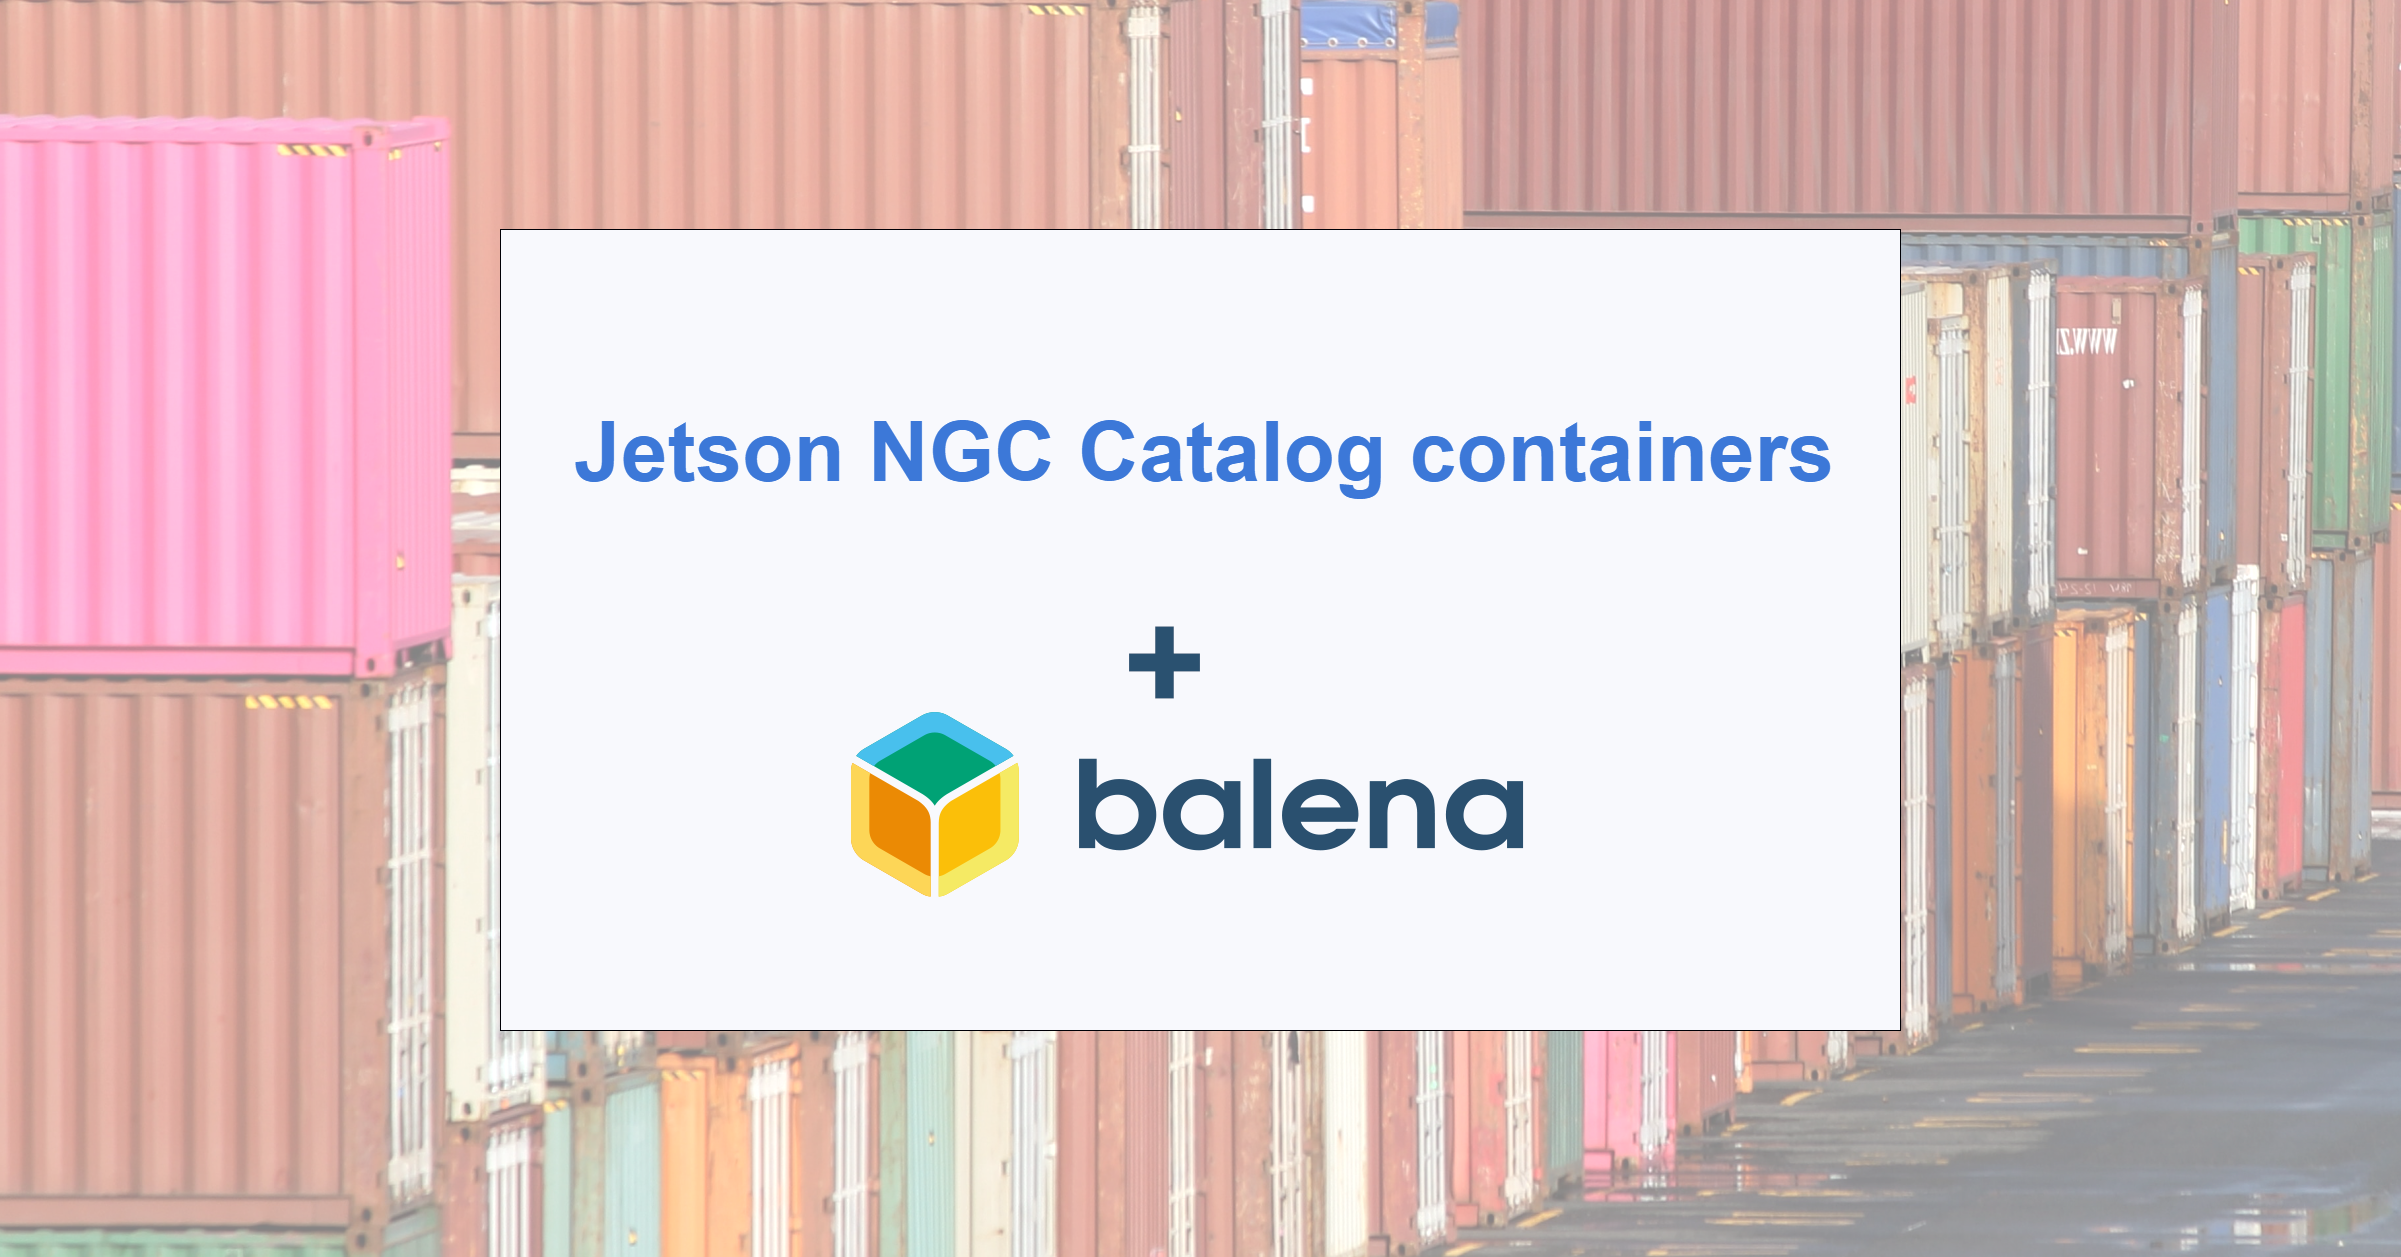 Using NVIDIA Jetson NGC containers on balenaOS